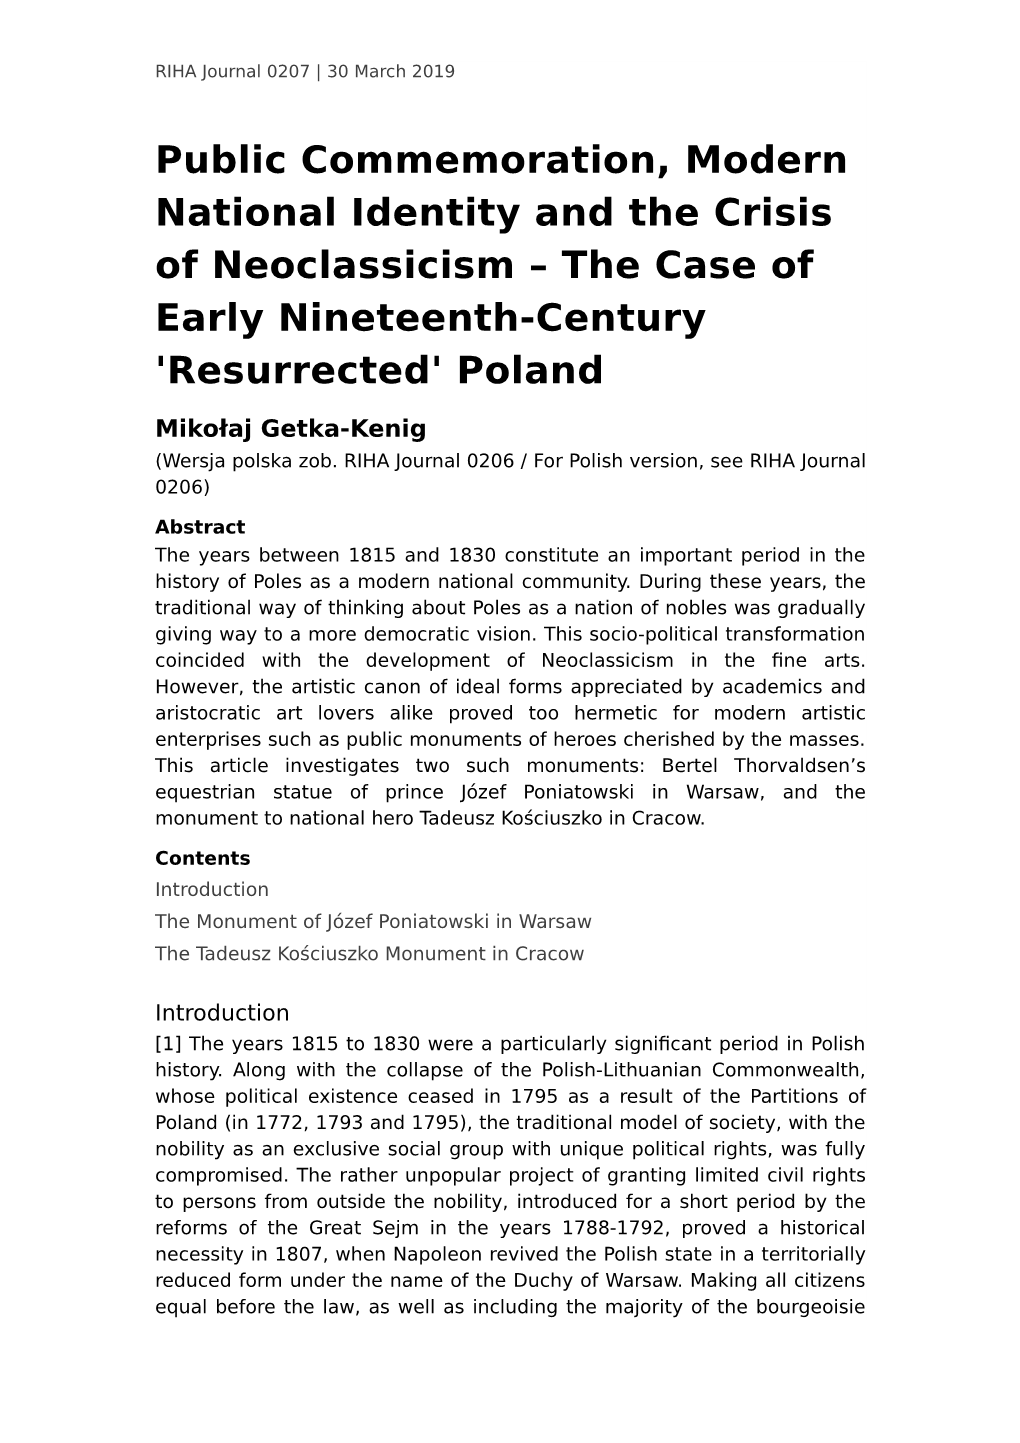 Public Commemoration, Modern National Identity and the Crisis of Neoclassicism – the Case of Early Nineteenth-Century 'Resurrected' Poland